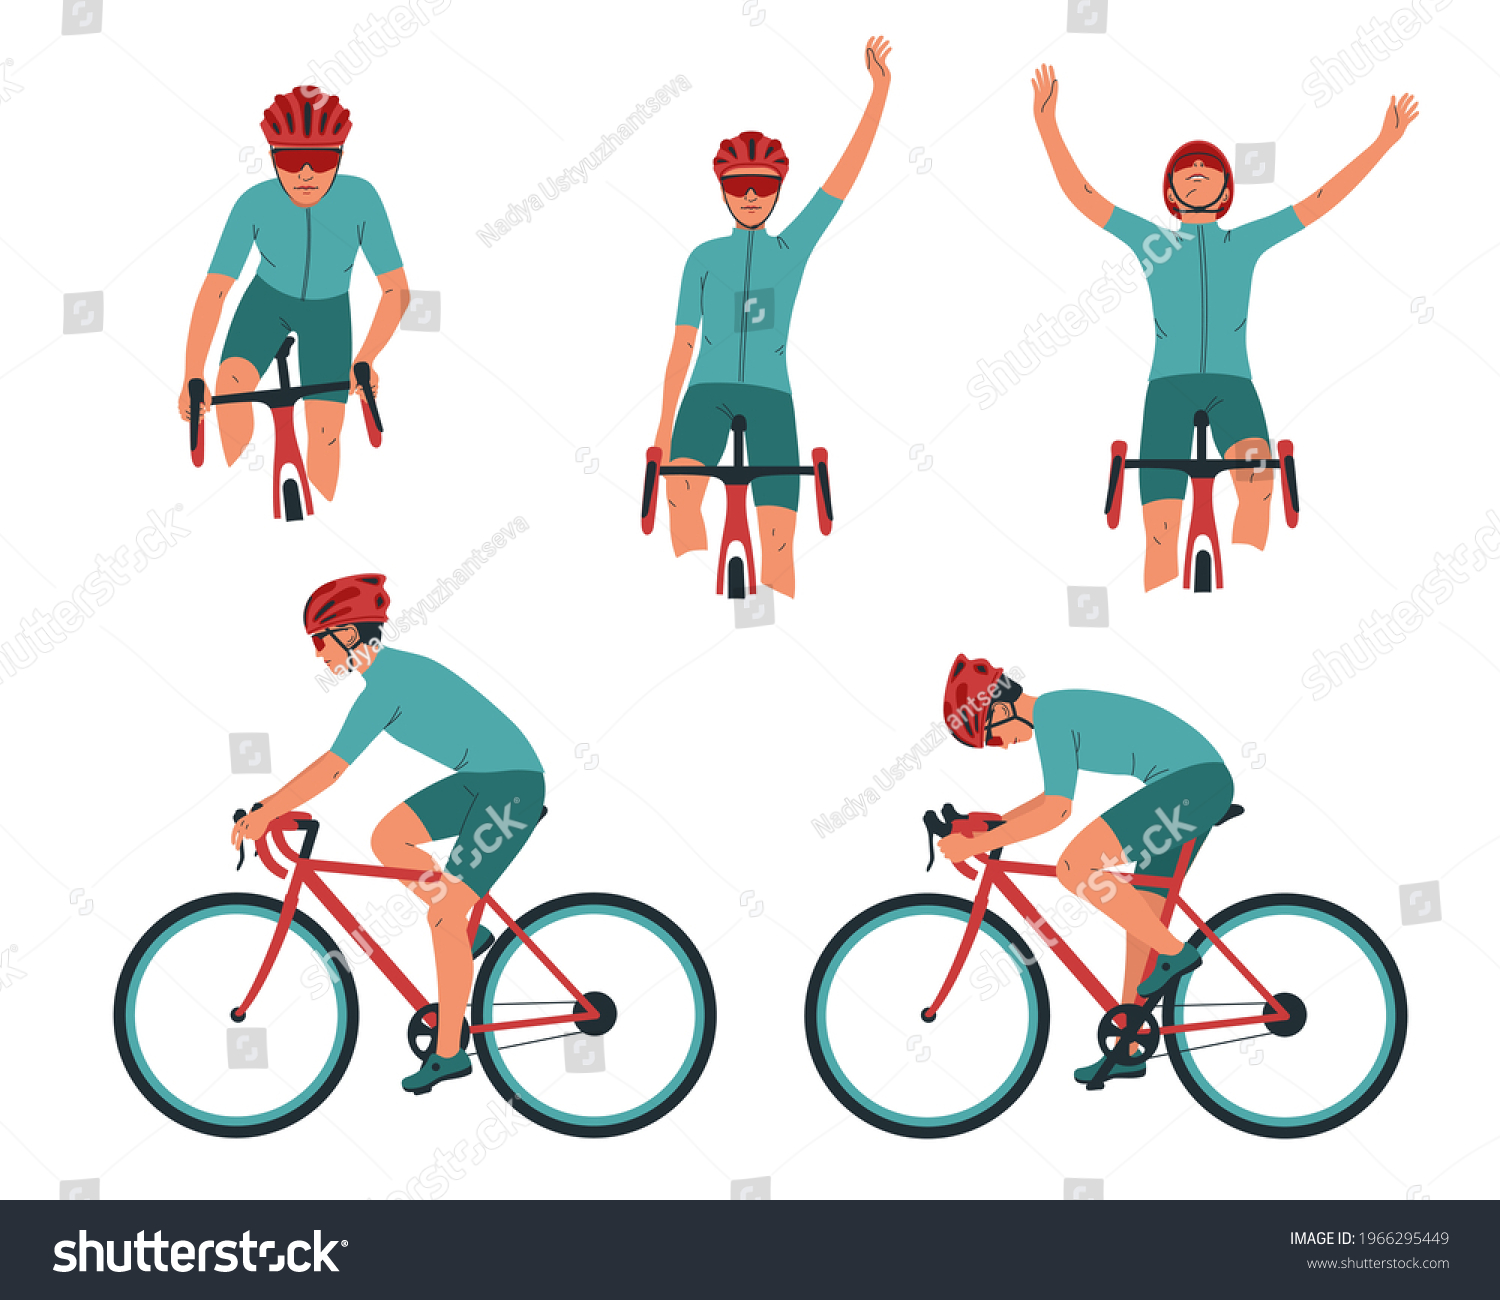 Cyclist in action set. Biker on a bicycle race from the side, front. Competition, victory in sports. Collection of vector illustrations isolated on white background. #1966295449